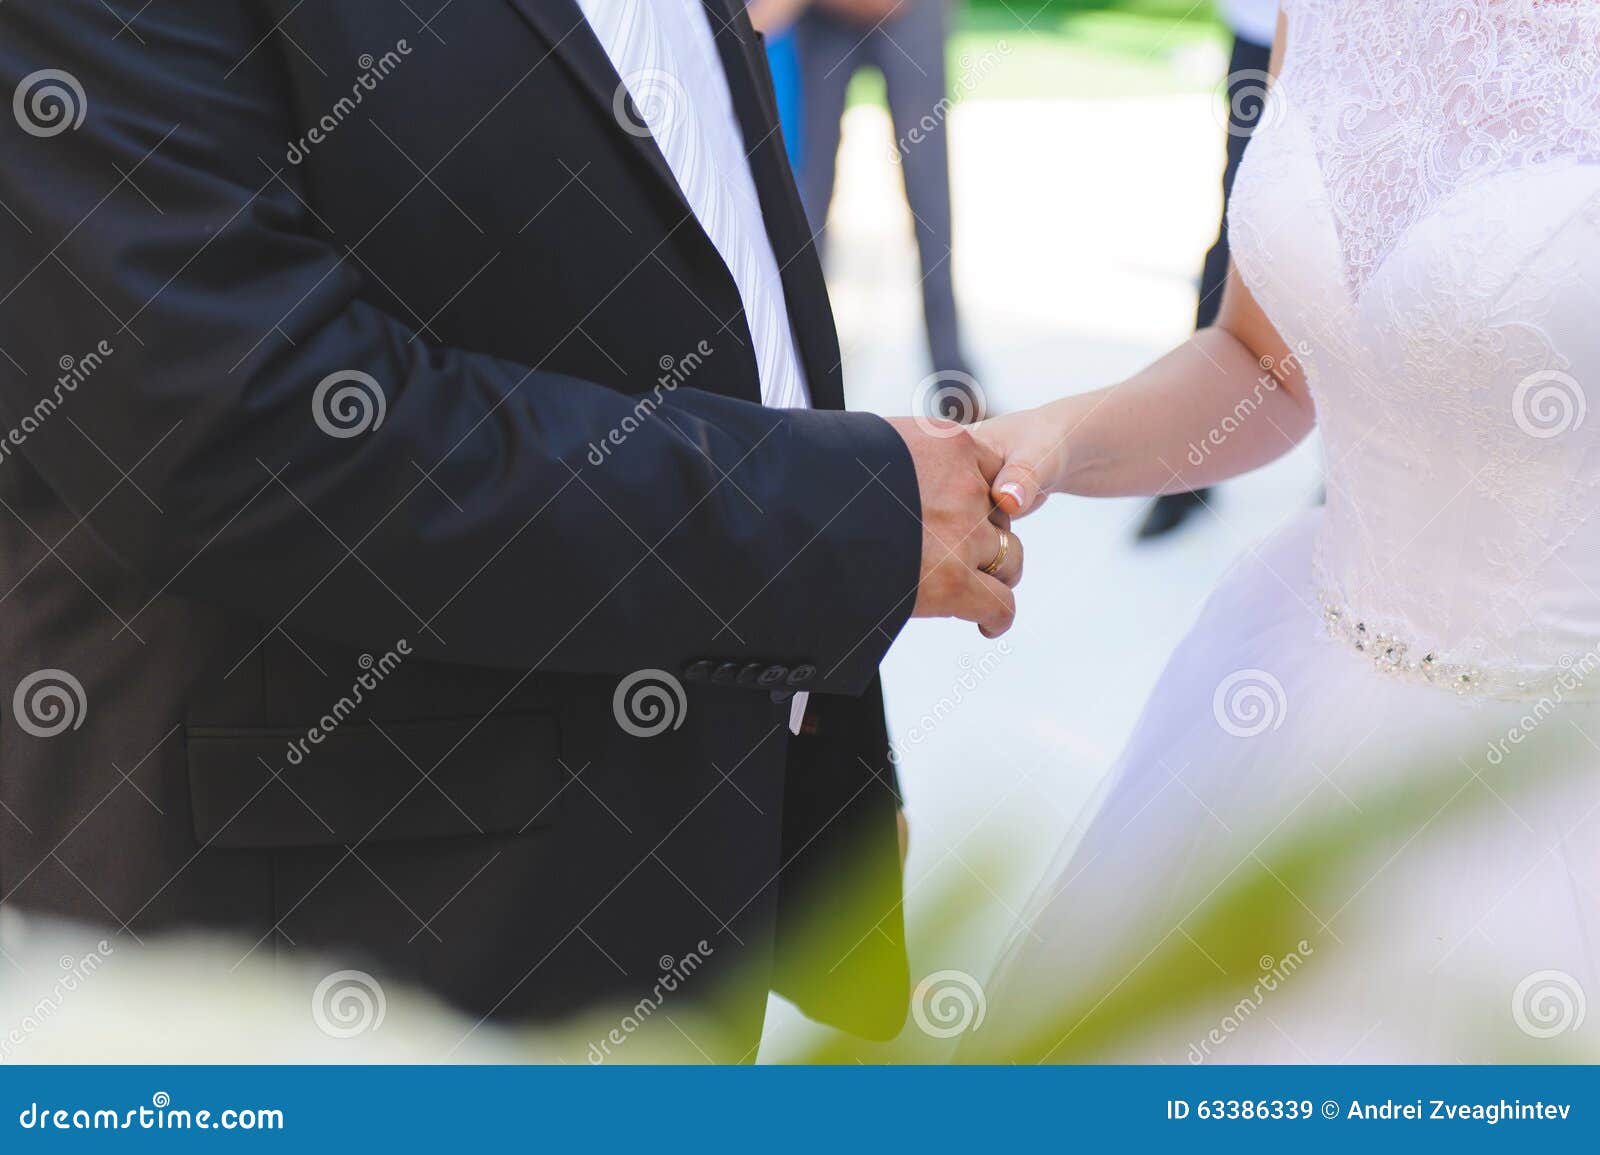 Holding Hands at Ceremony stock image. Image of agreement - 63386339